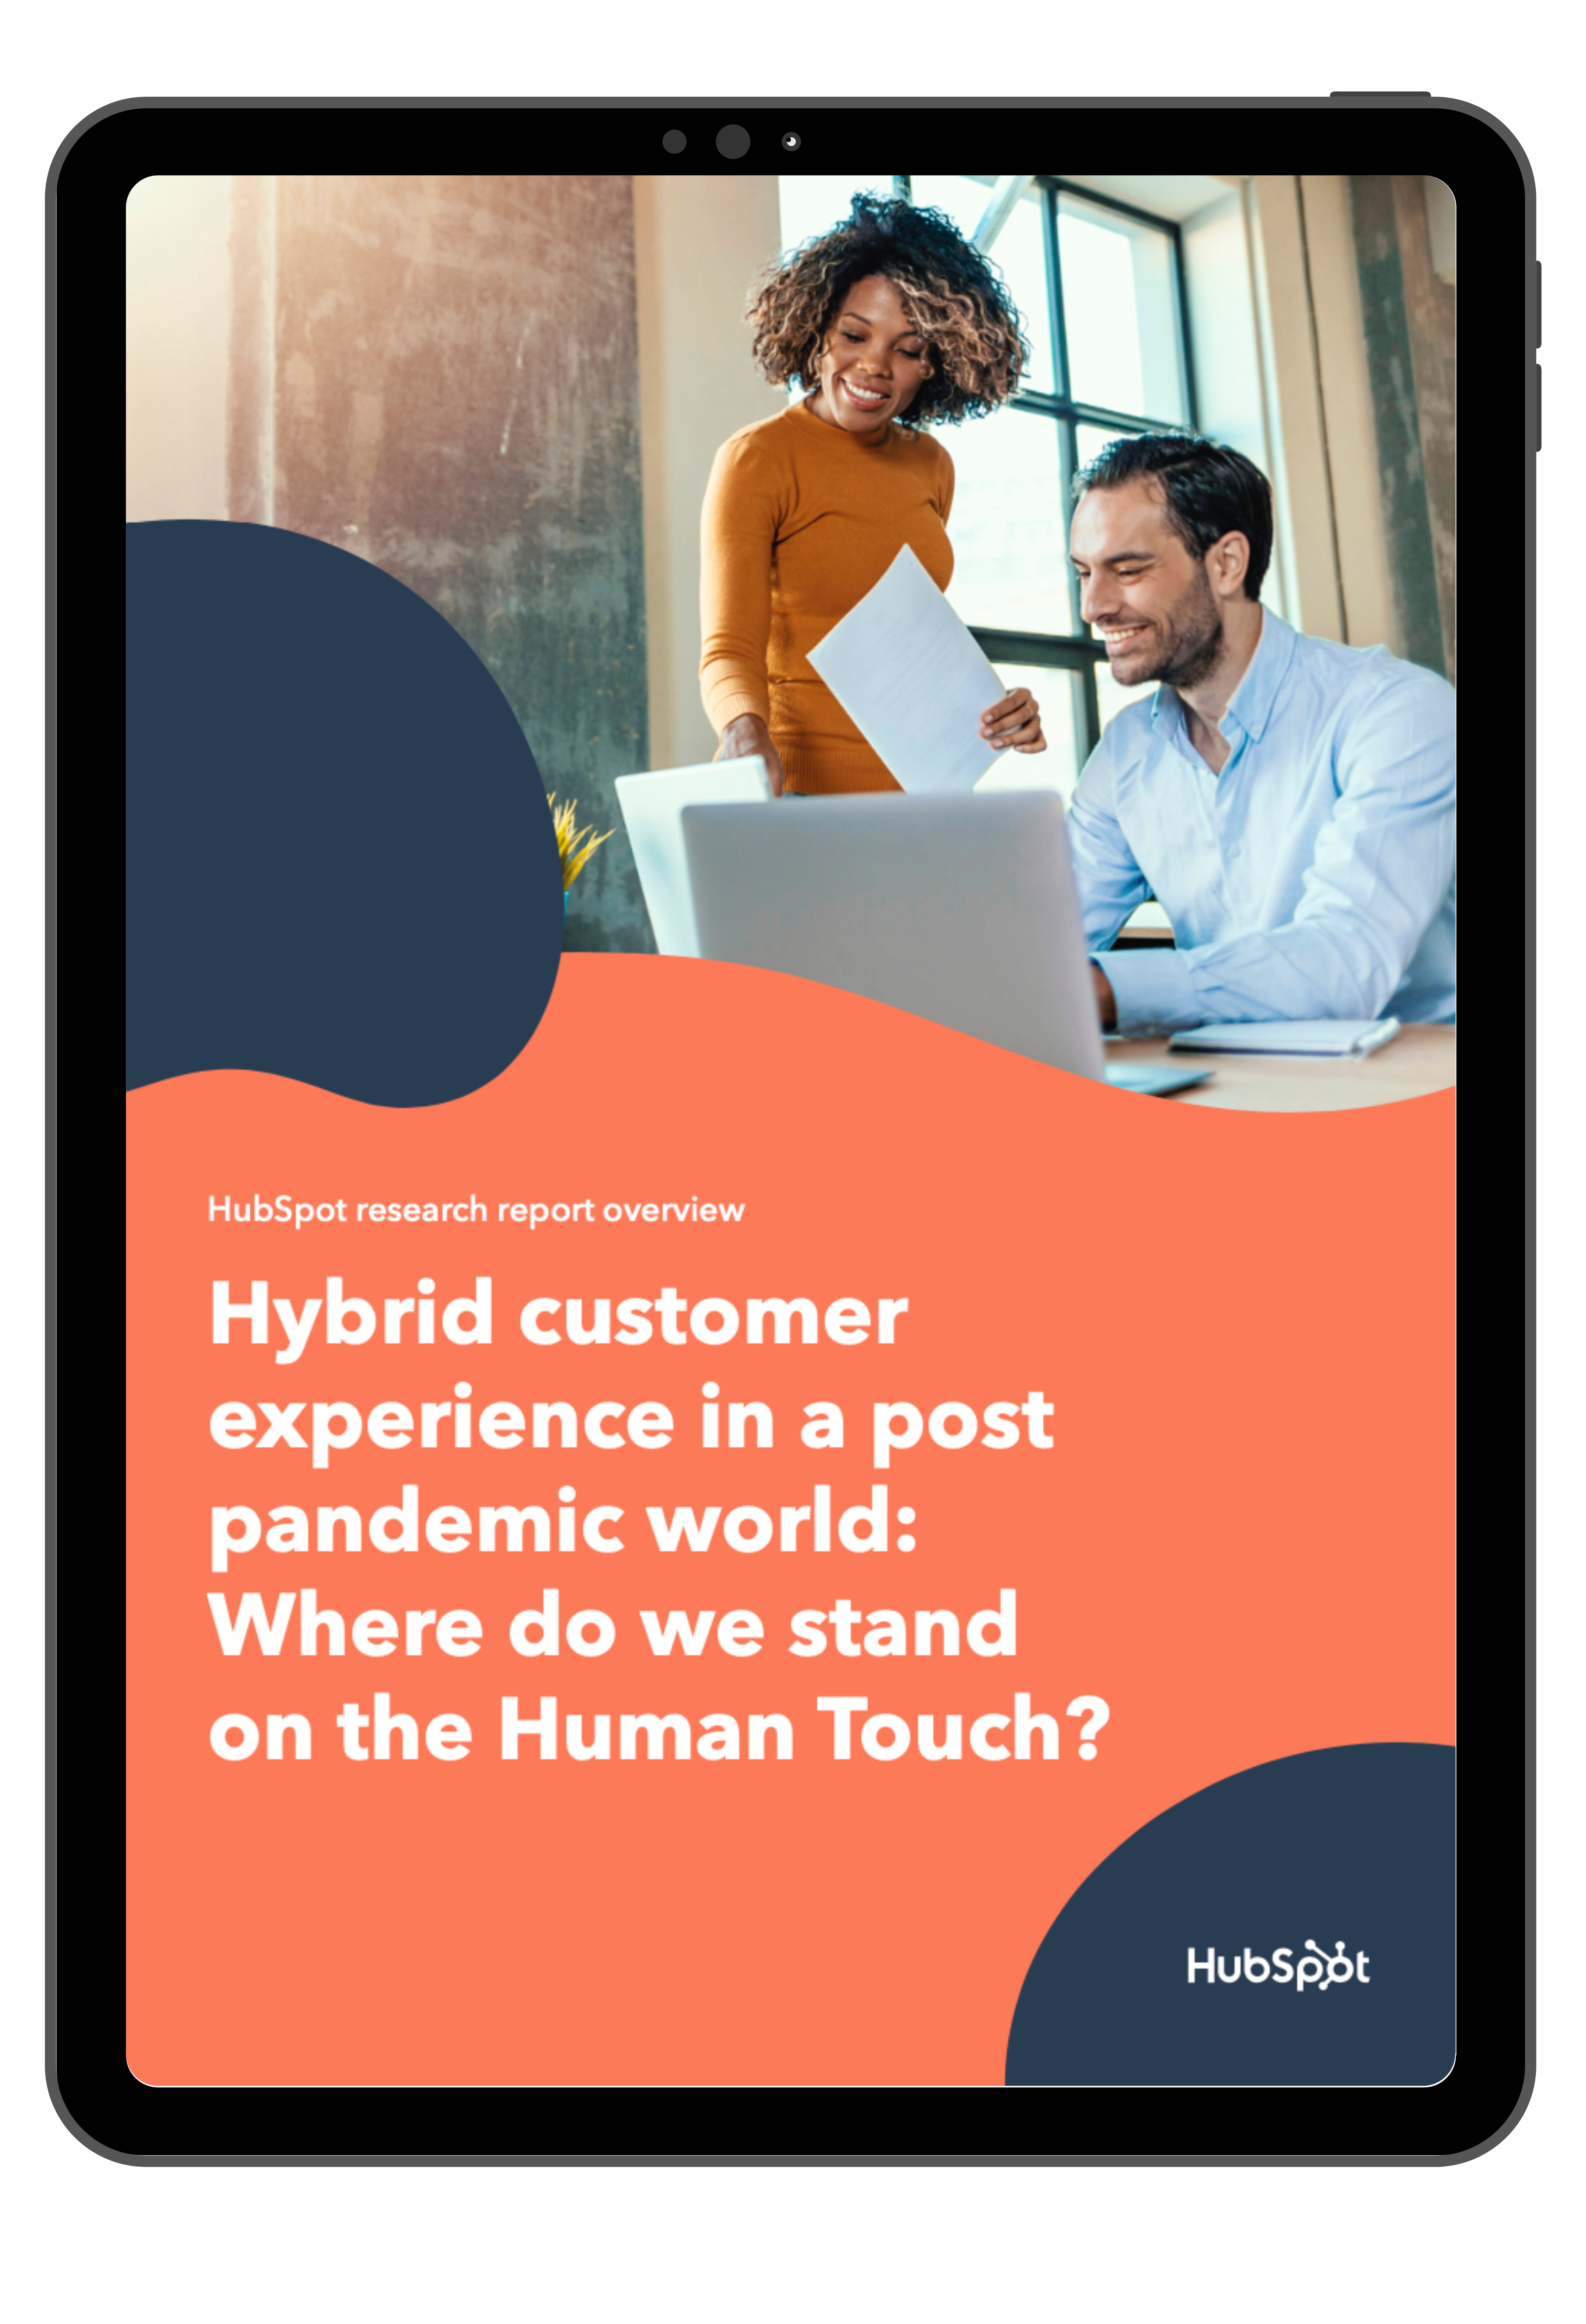 Hybrid customer experience in a post pandemic world Where do we stand on the Human Touch (1)